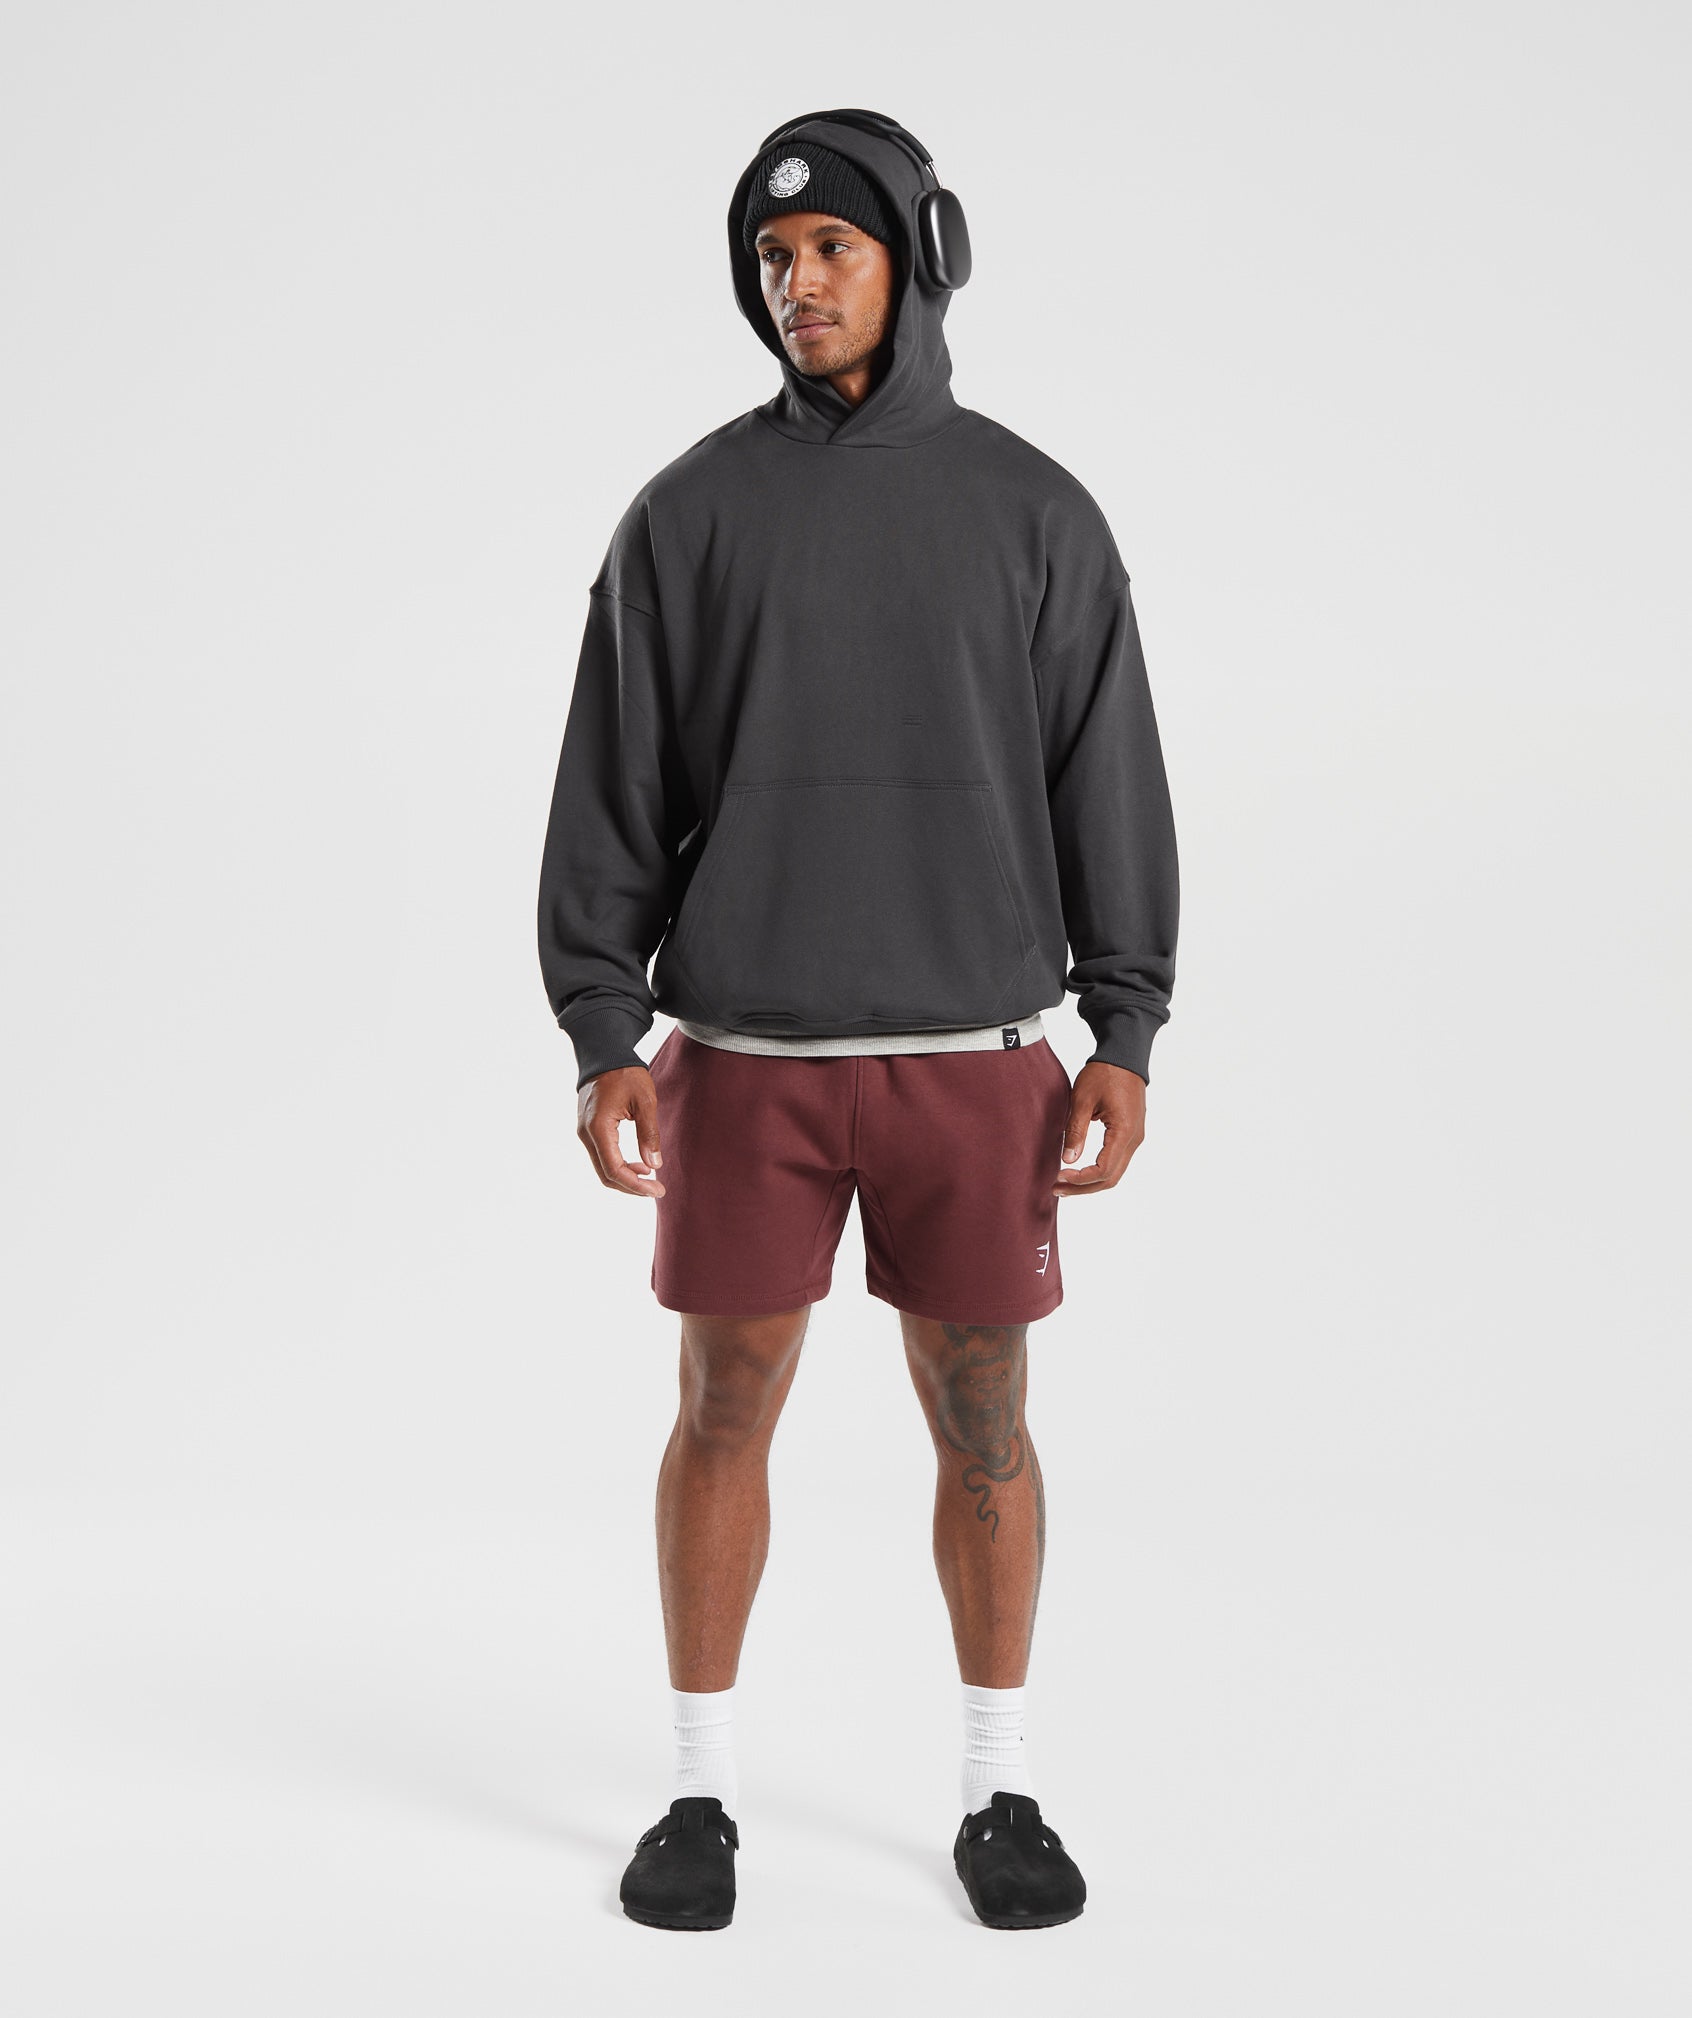 Crest 7" Shorts in Washed Burgundy - view 4